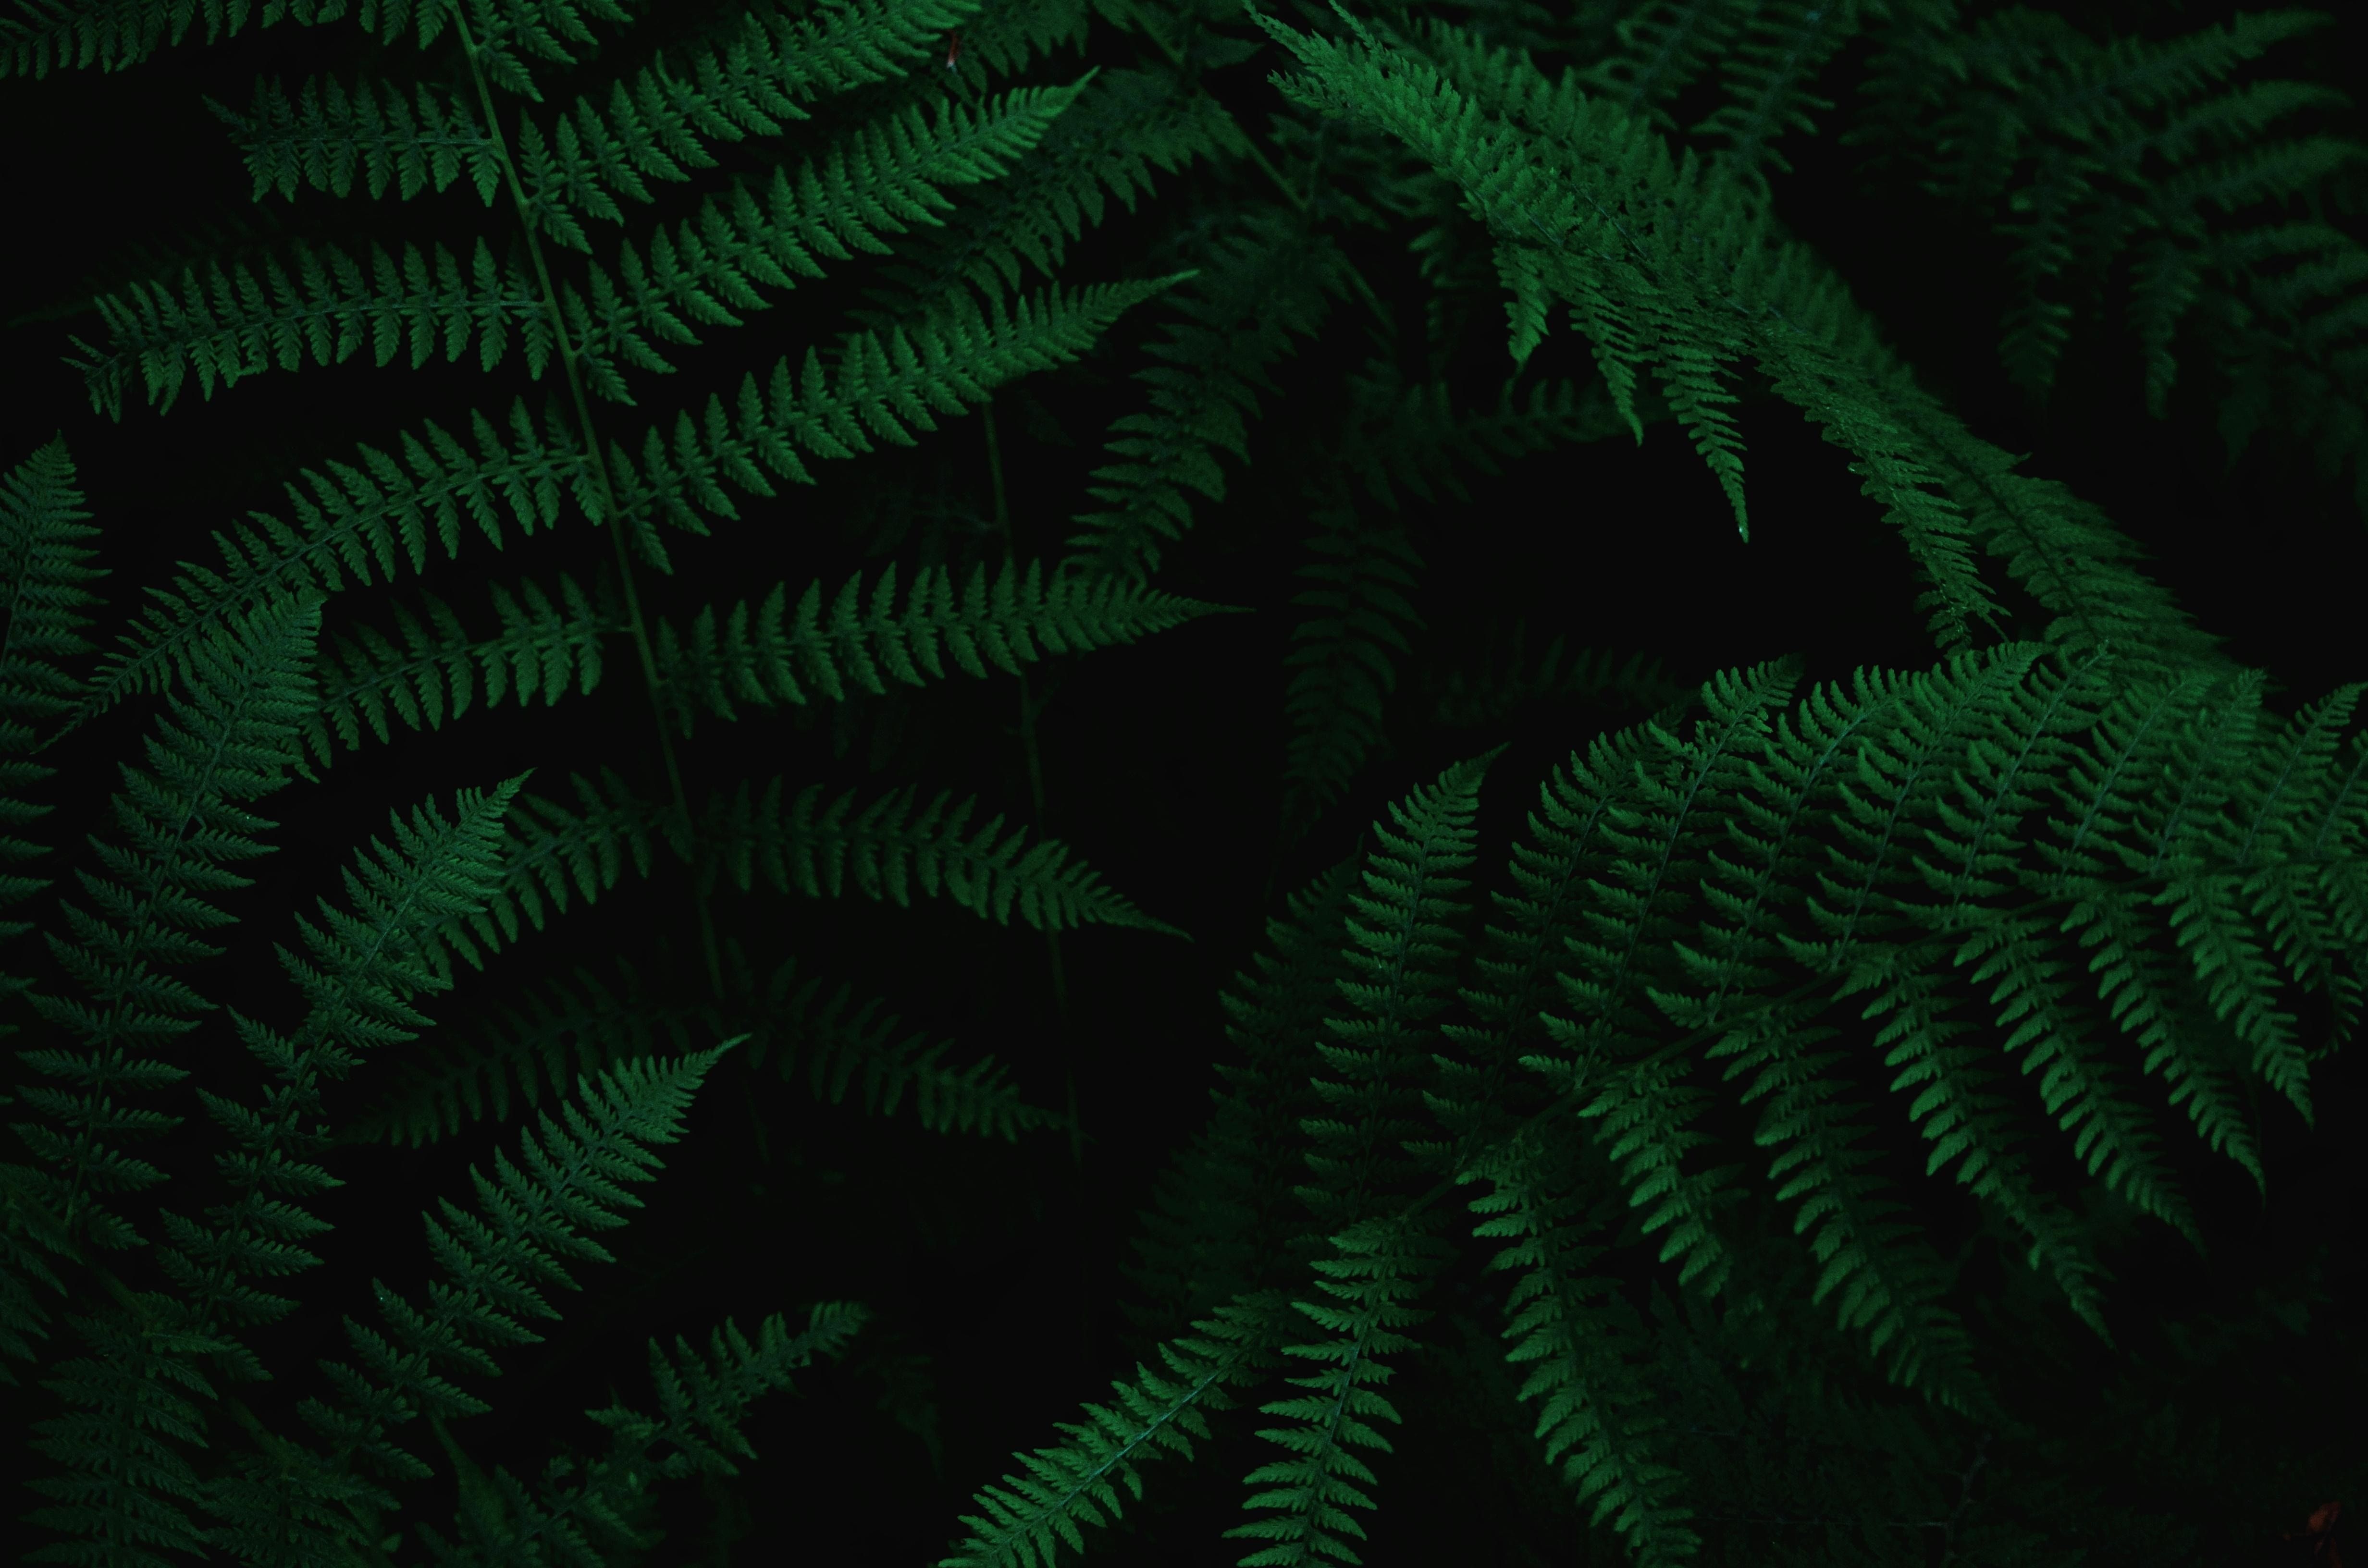 4928x3264 #moody, #forest, #green, #nature, #texture, #Creative Commons image, #wallpaper, #leaf, #plant, #shadow, #leaves, #tree, #fern, #leafe, #detail HD Wallpaper